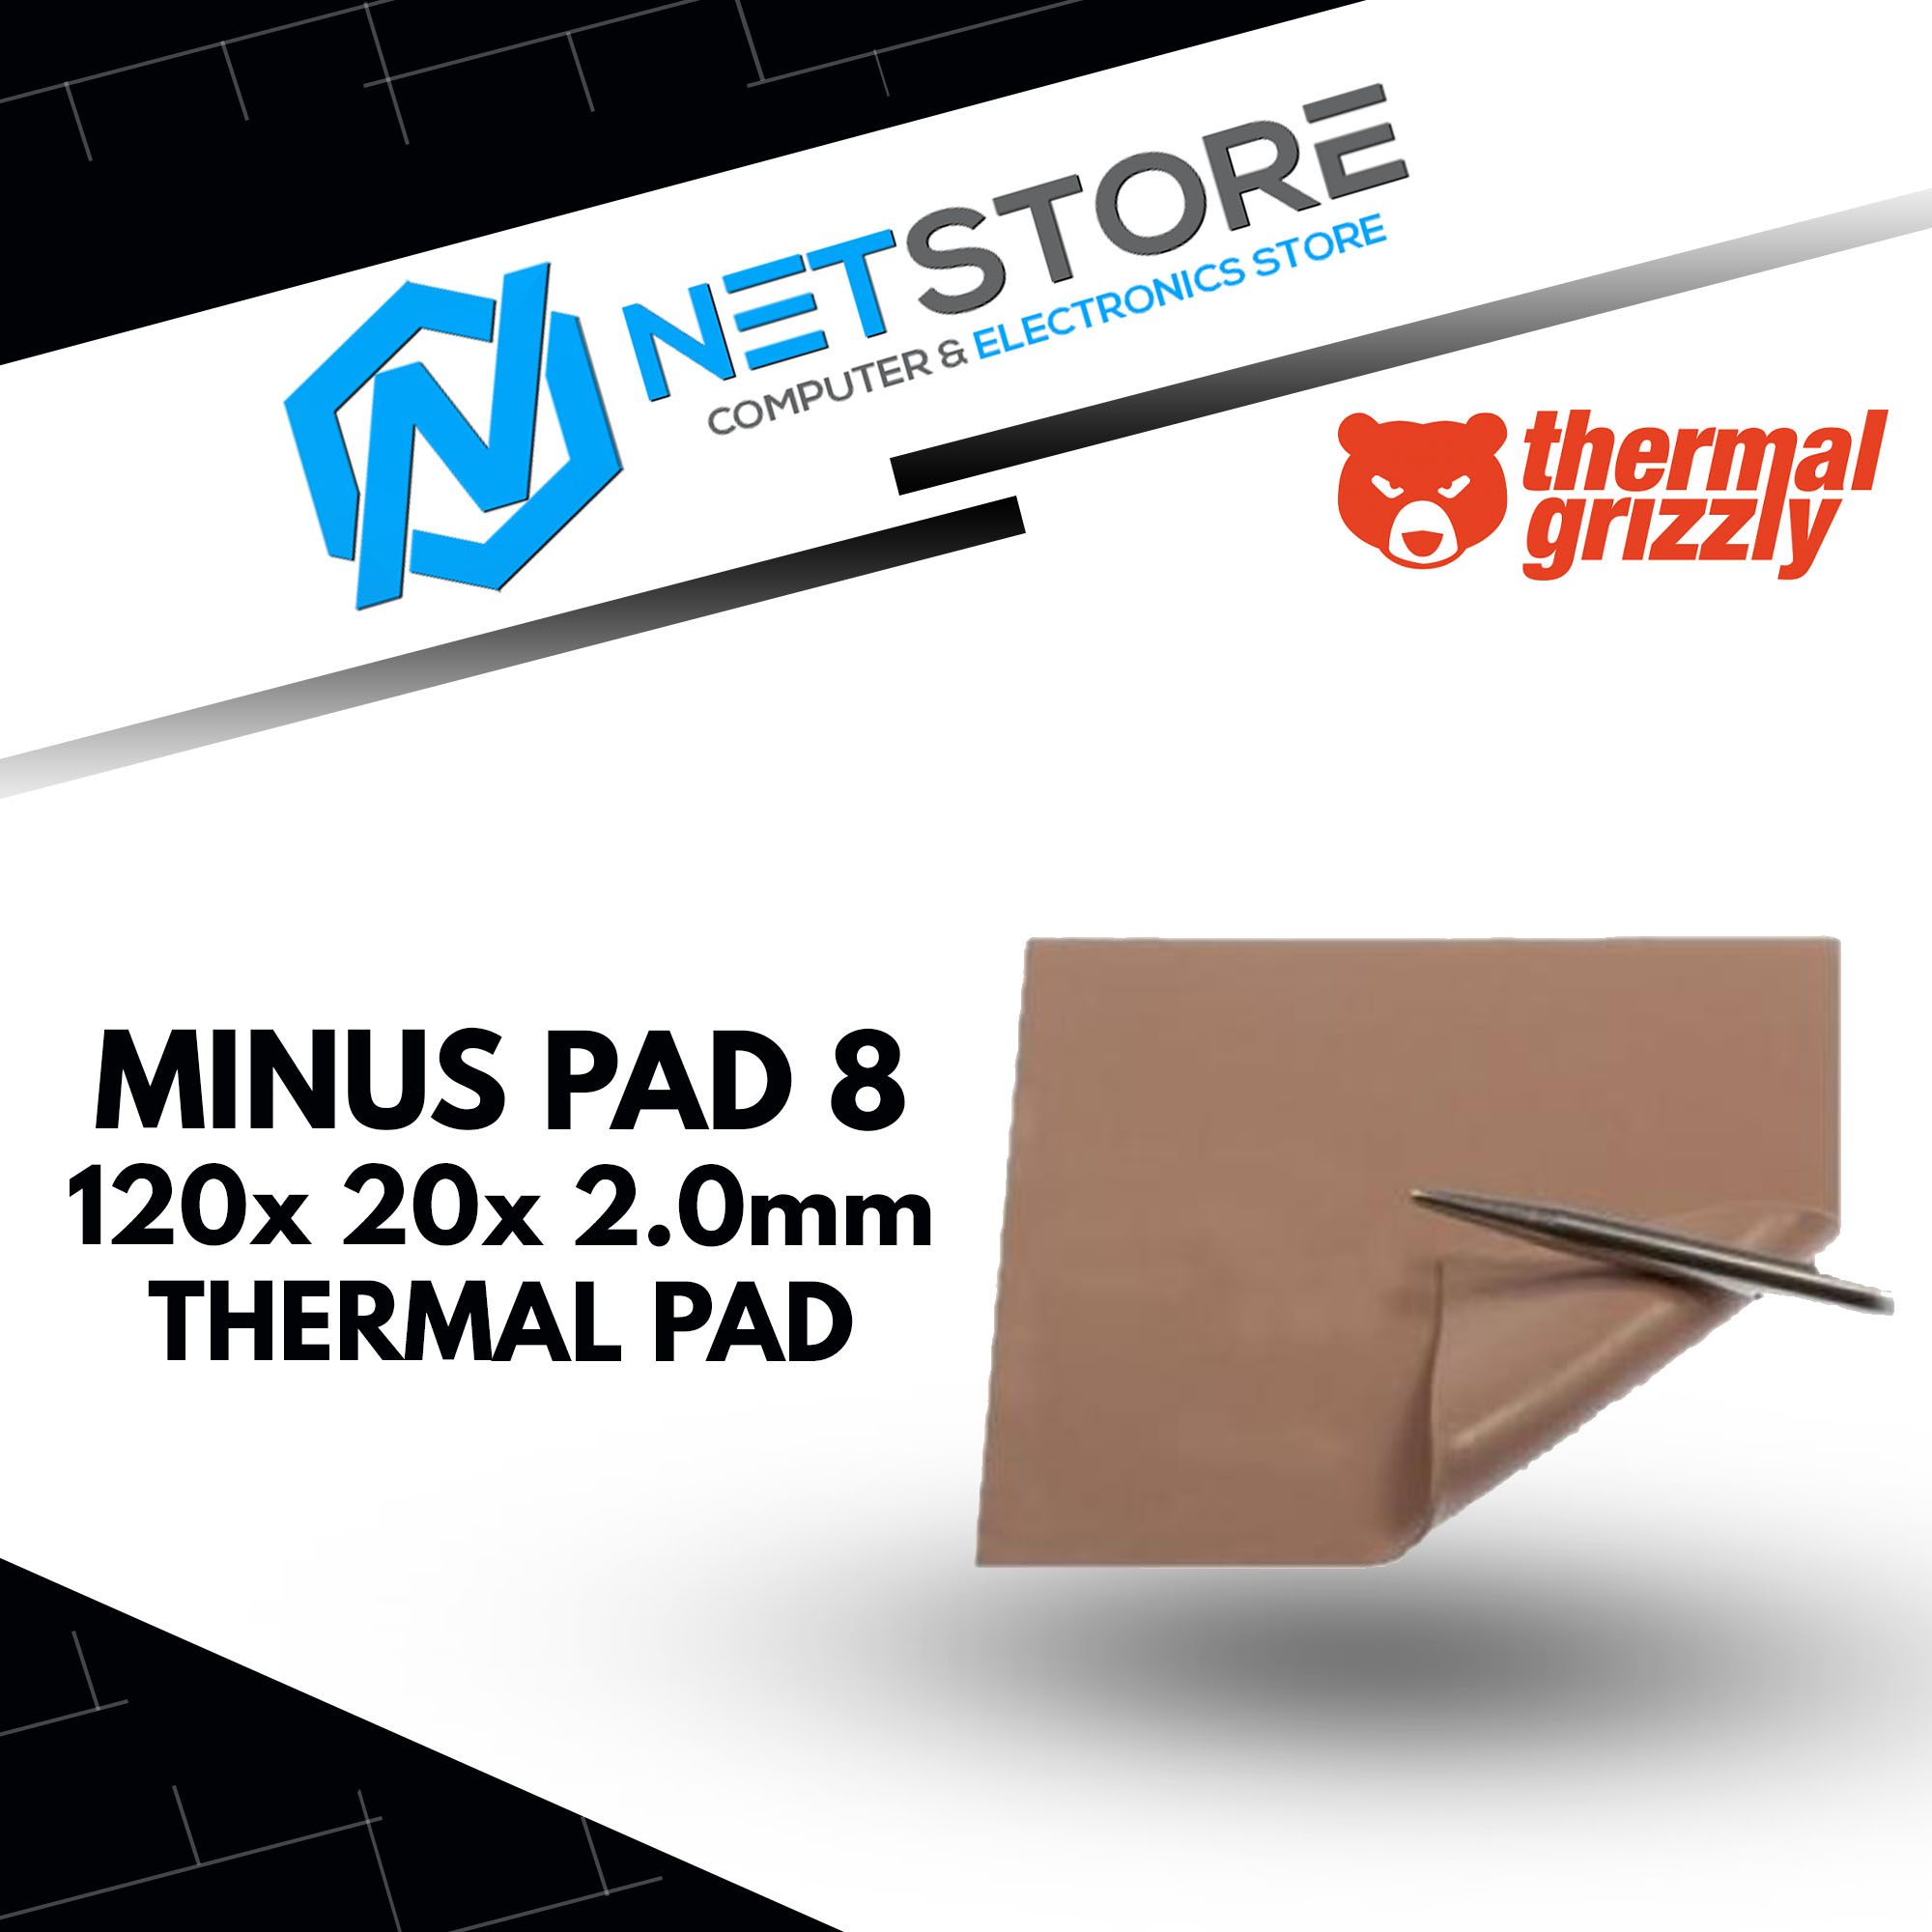 THERMAL GRIZZLY MINUS PAD 8 120x 20x 2.0mm THERMAL PAD